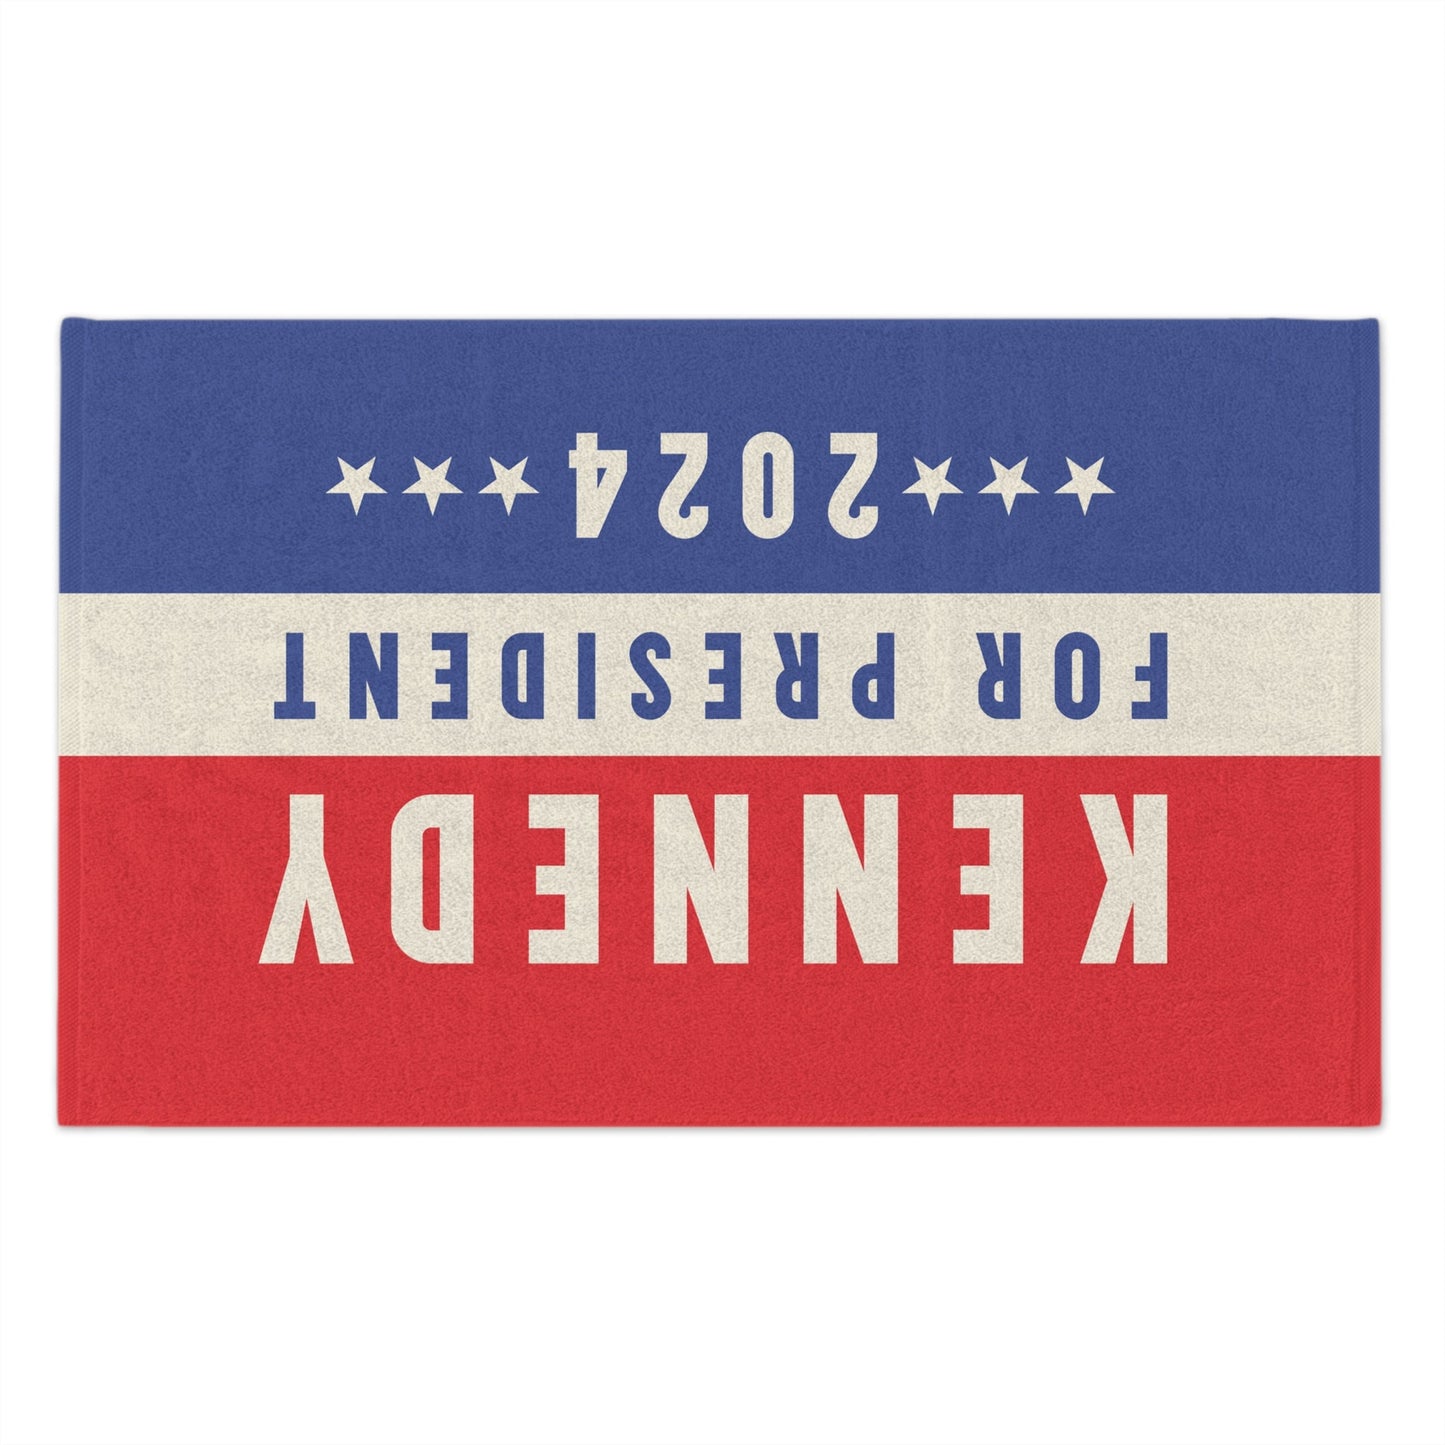 Kennedy for President Vintage Rally Towel, 11x18 - TEAM KENNEDY. All rights reserved